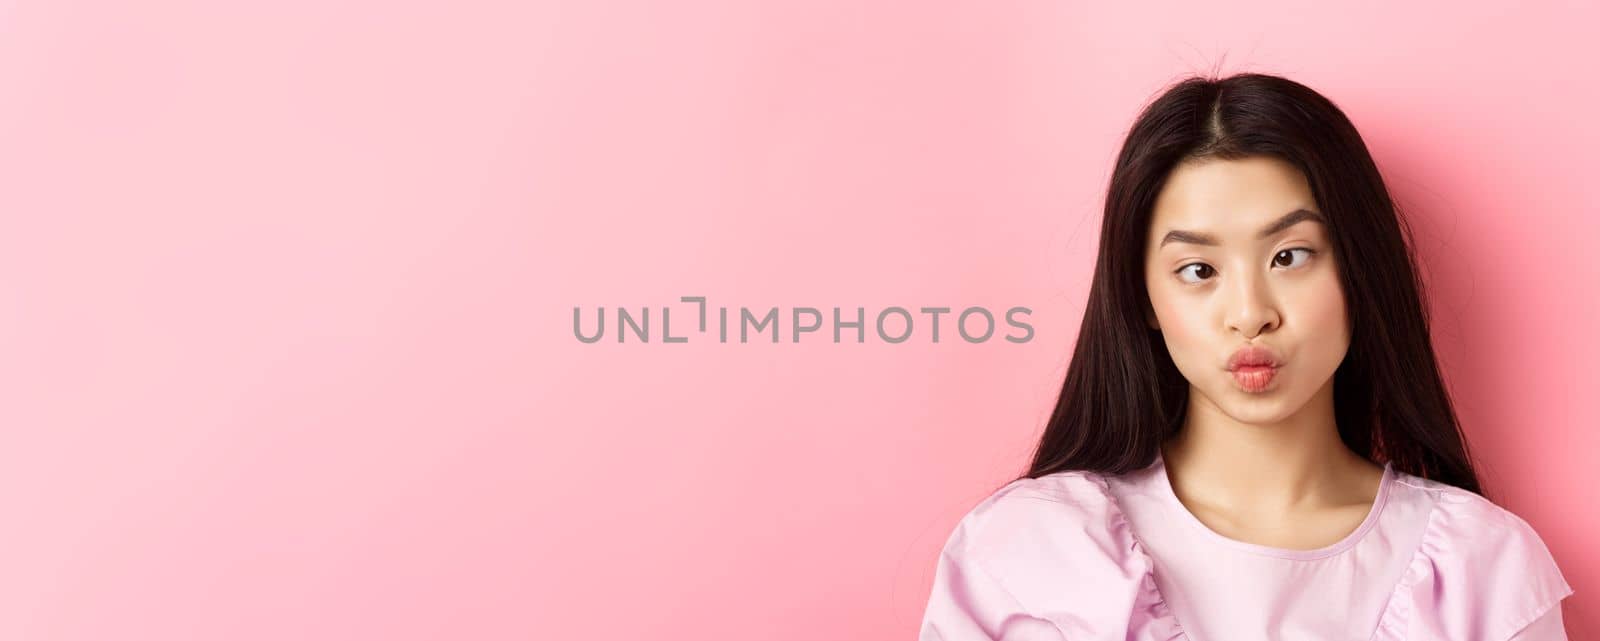 Close-up portrait of funny asian woman squinting eyes and making silly faces, standing against pink background.